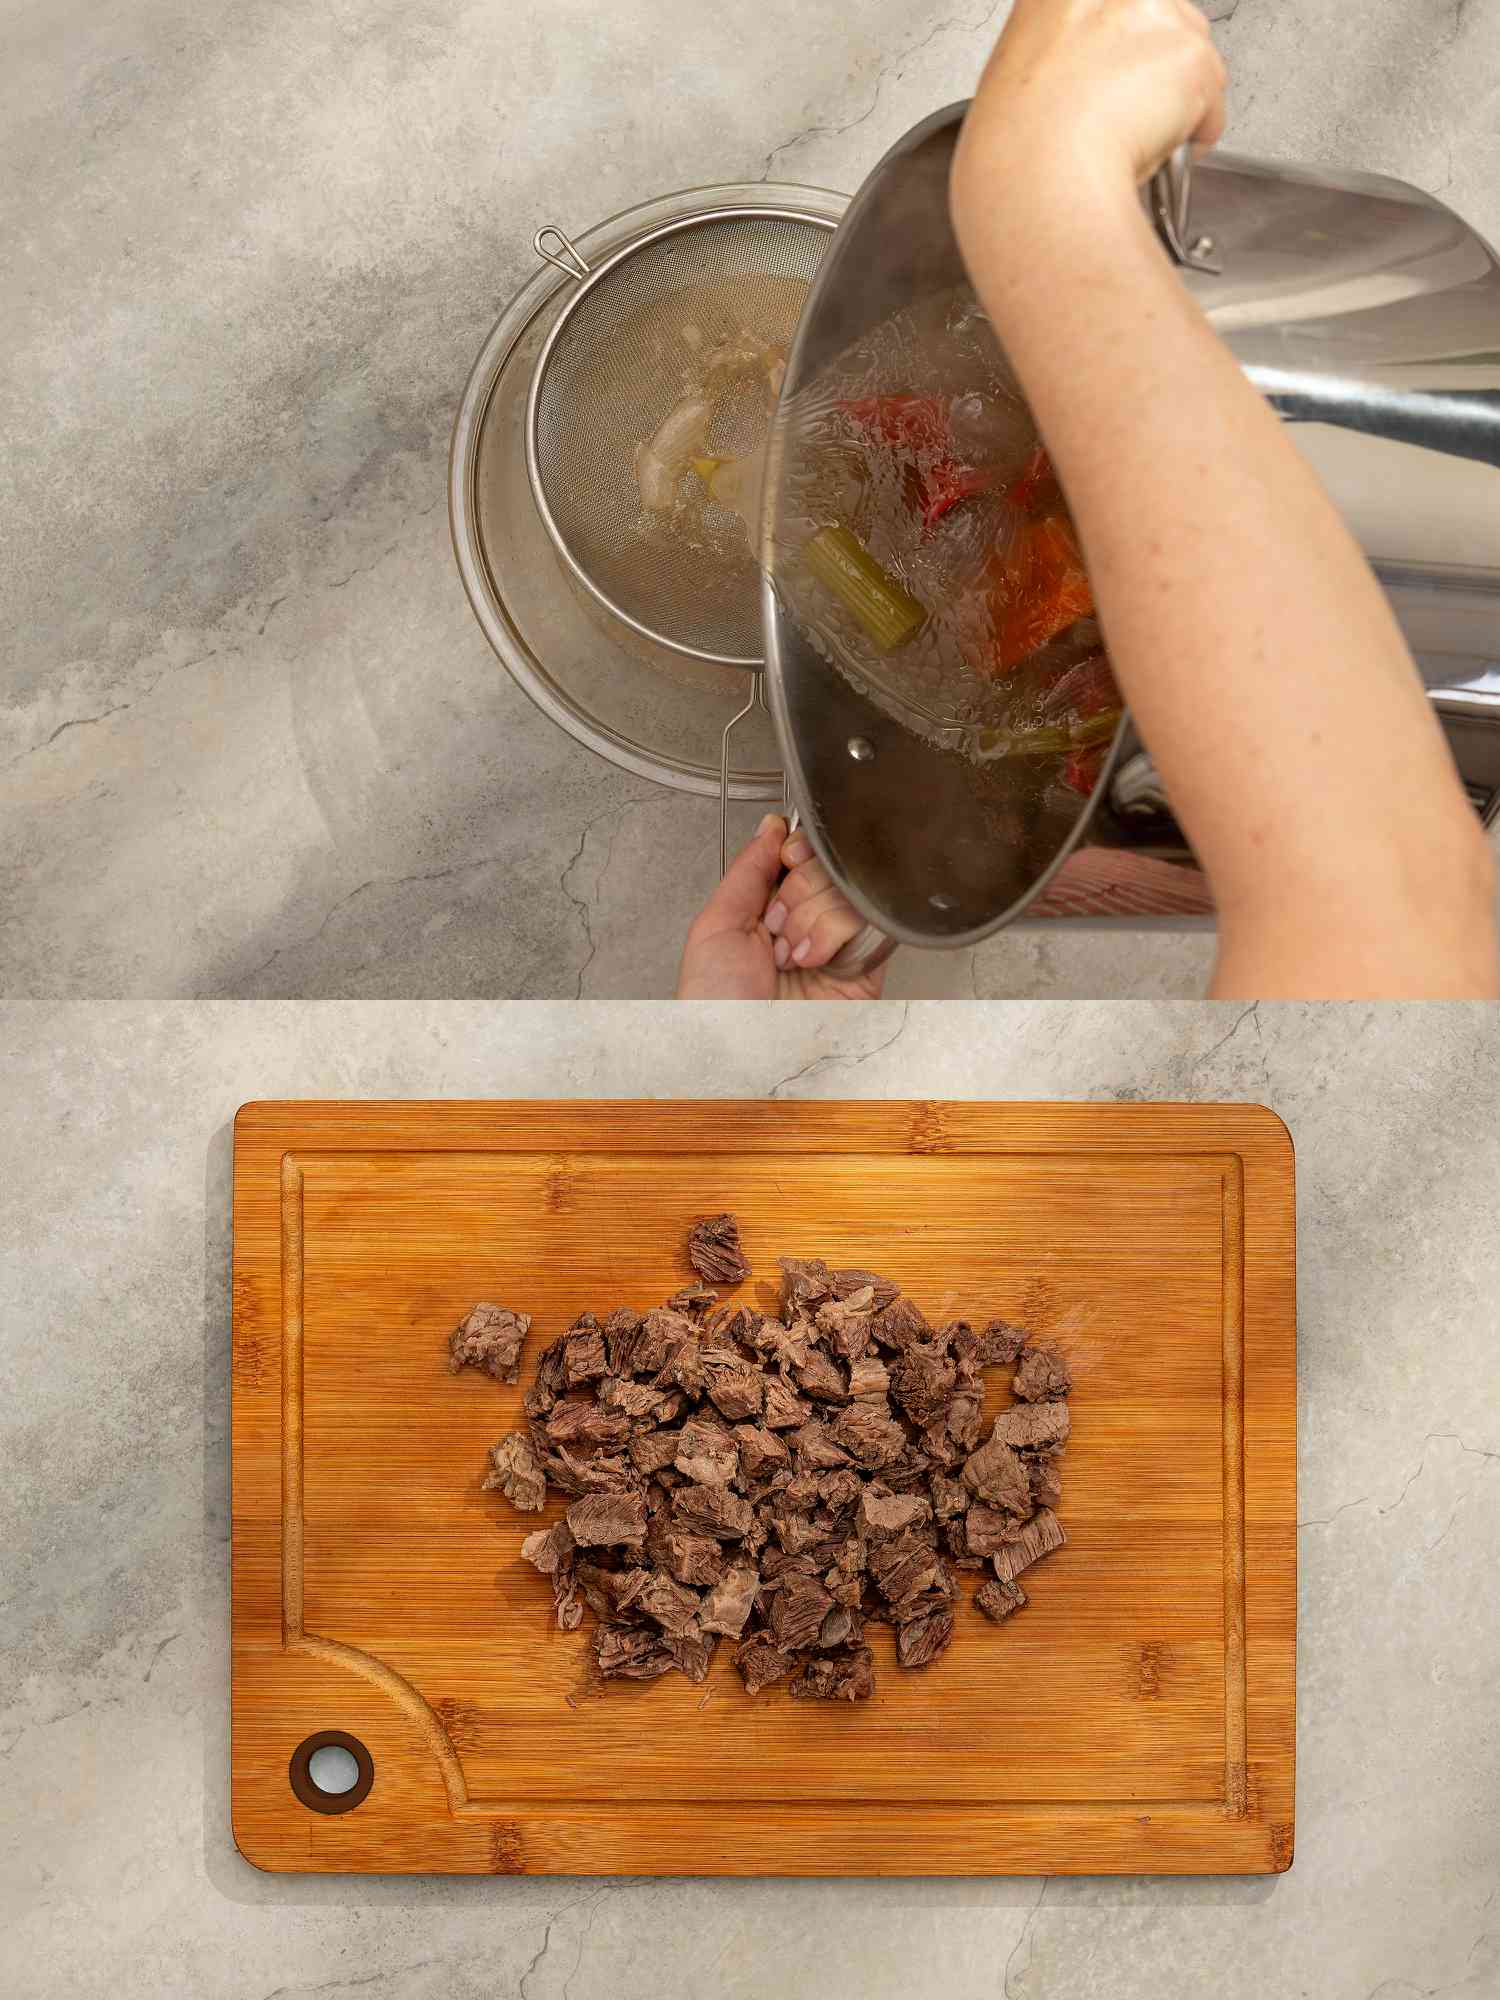 Two image collage of straining broth and meat cut up on a cutting board